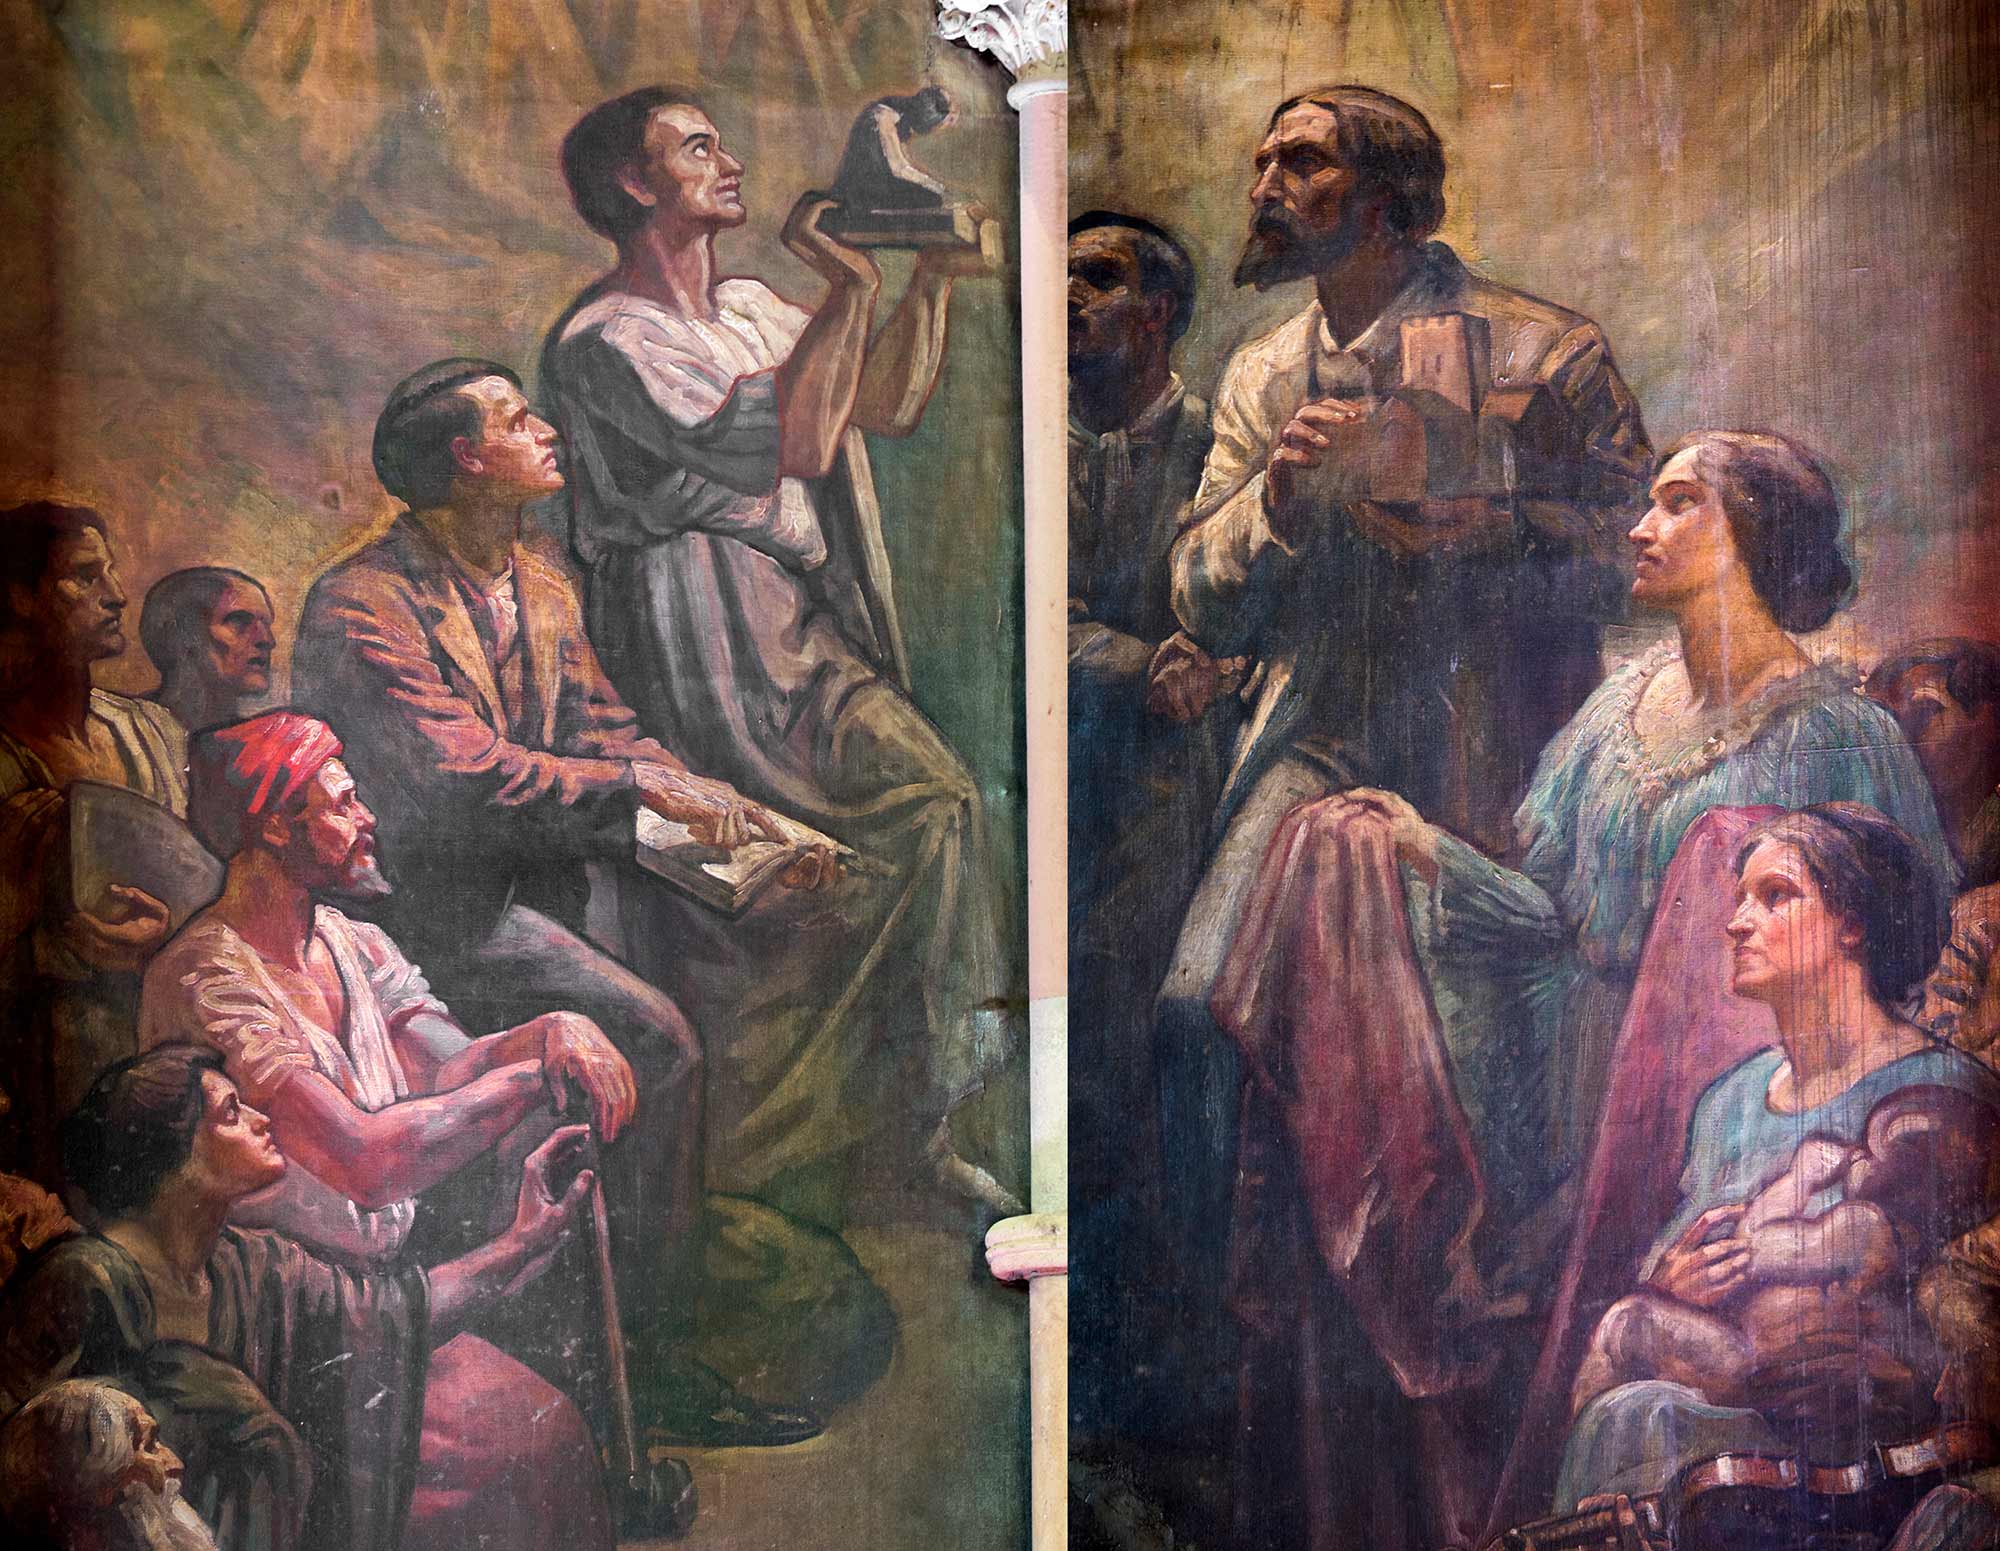 Details from the mural inside the church - 